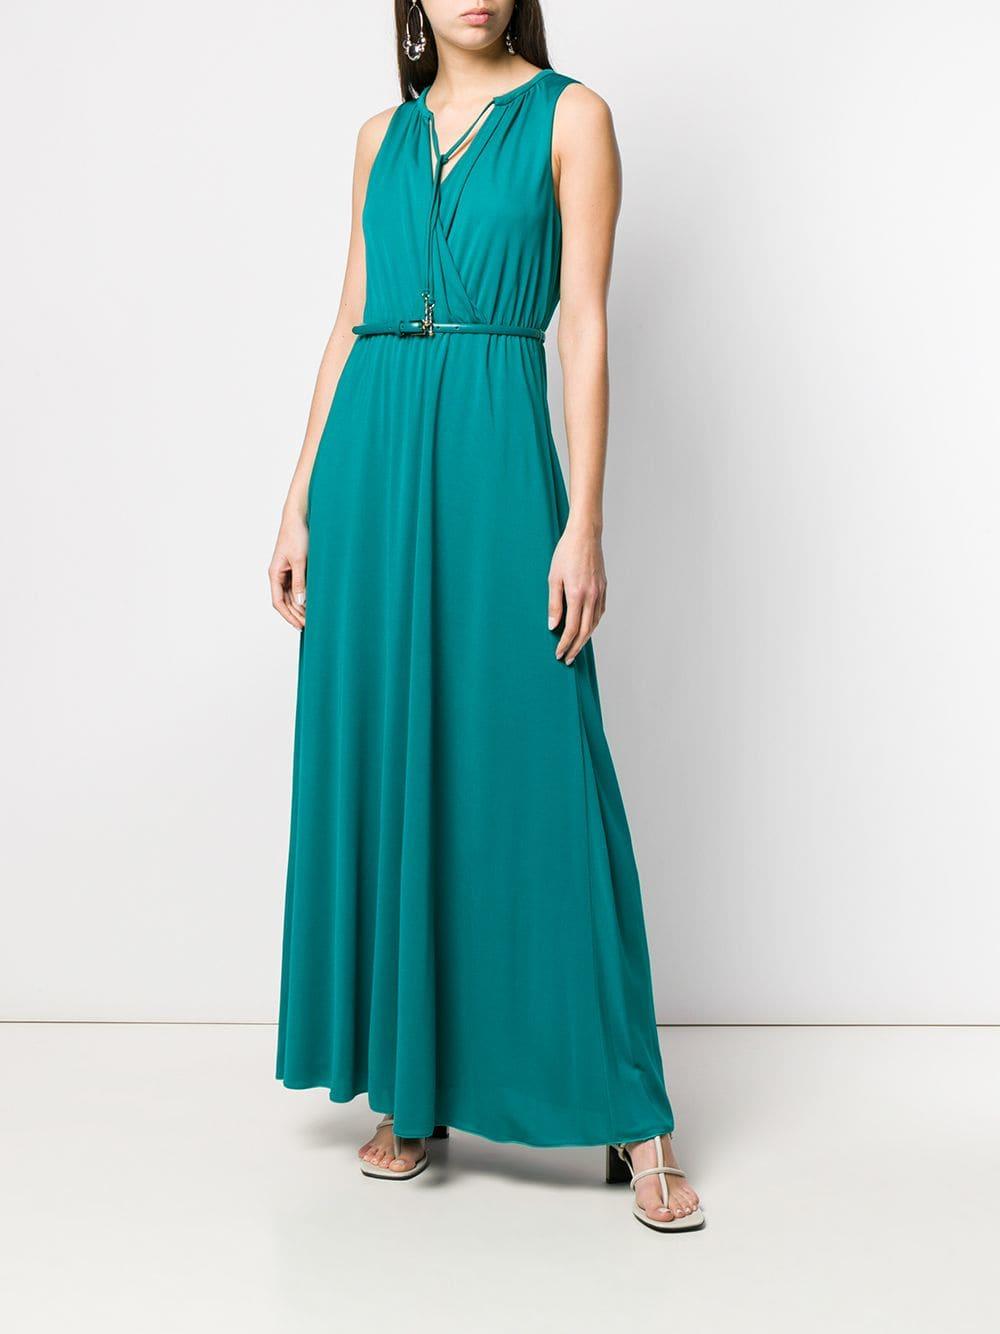 Max Mara Studio Synthetic Belted Maxi Dress in Green - Lyst